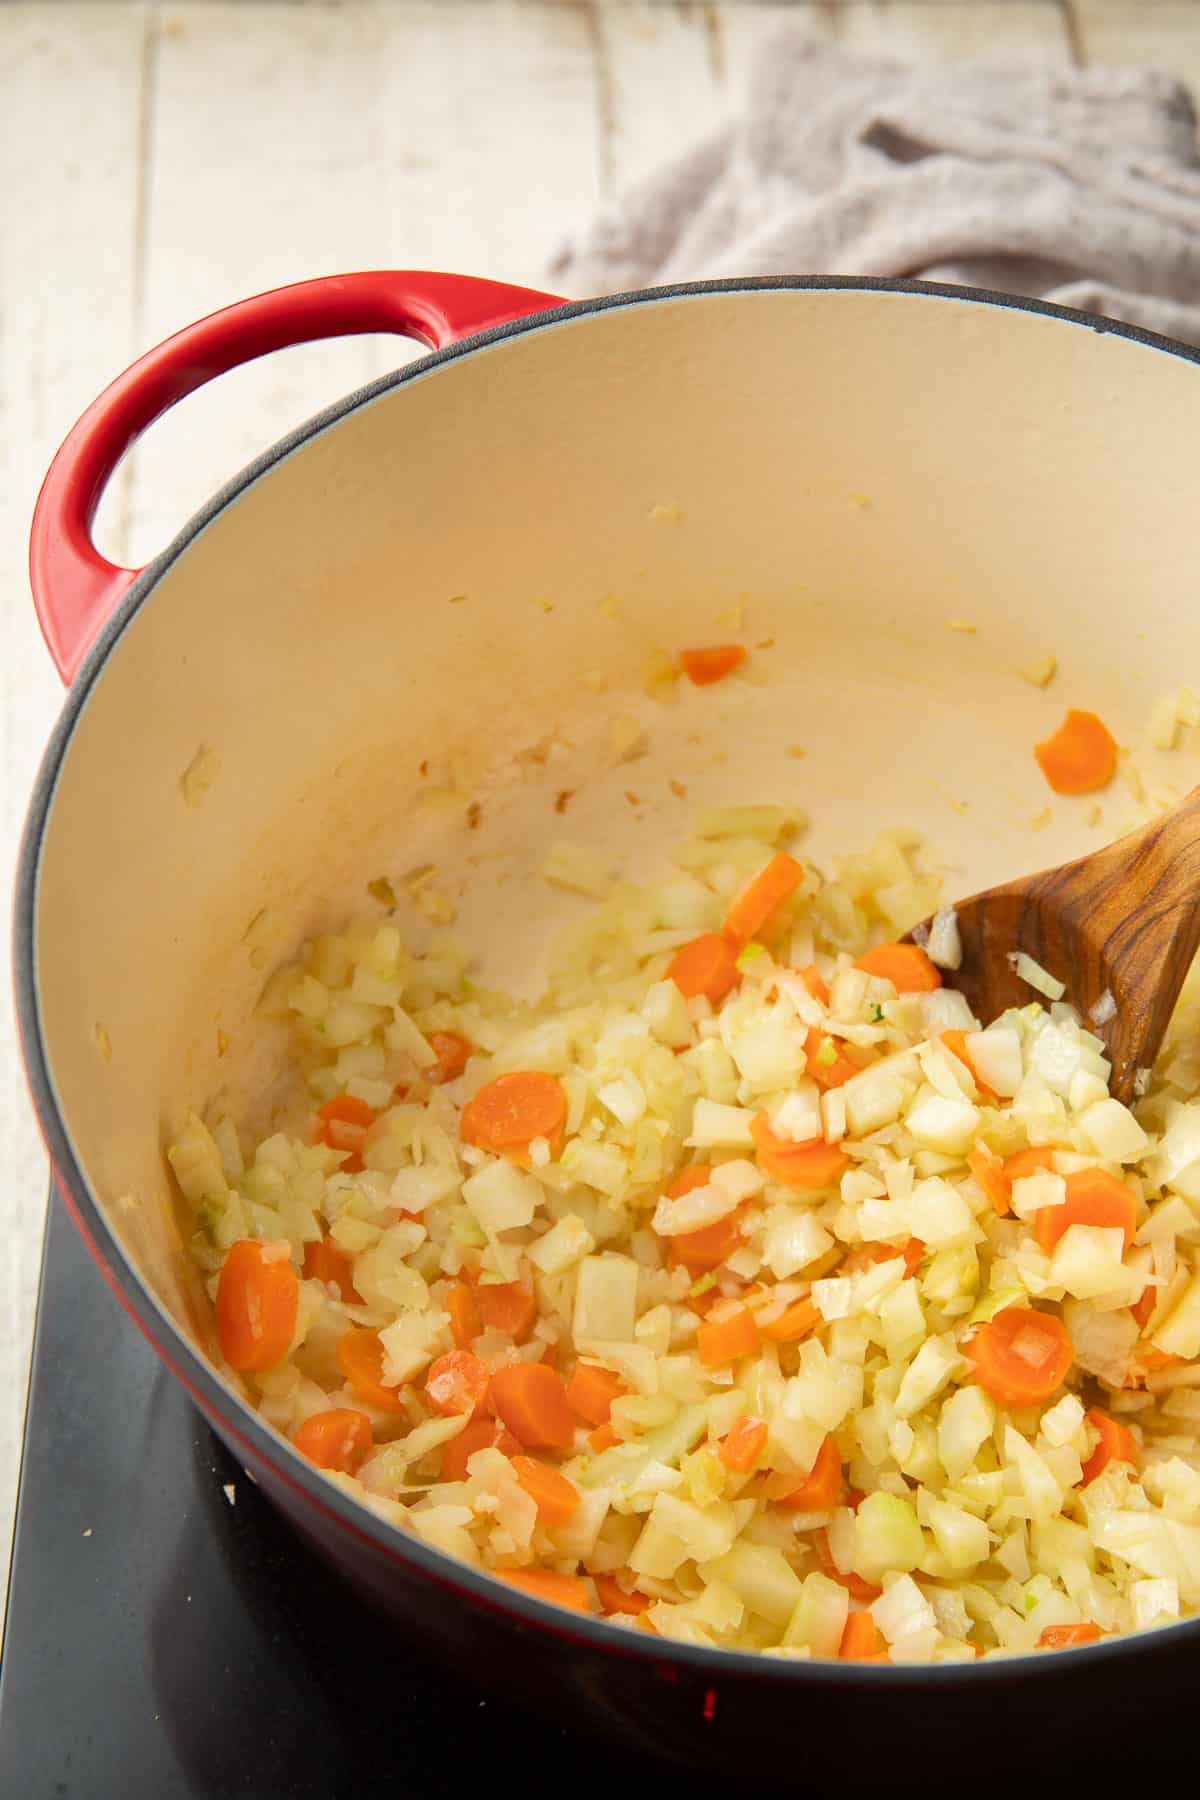 Diced onion, fennel, sliced carrots, and minced garlic cooking in a pot.